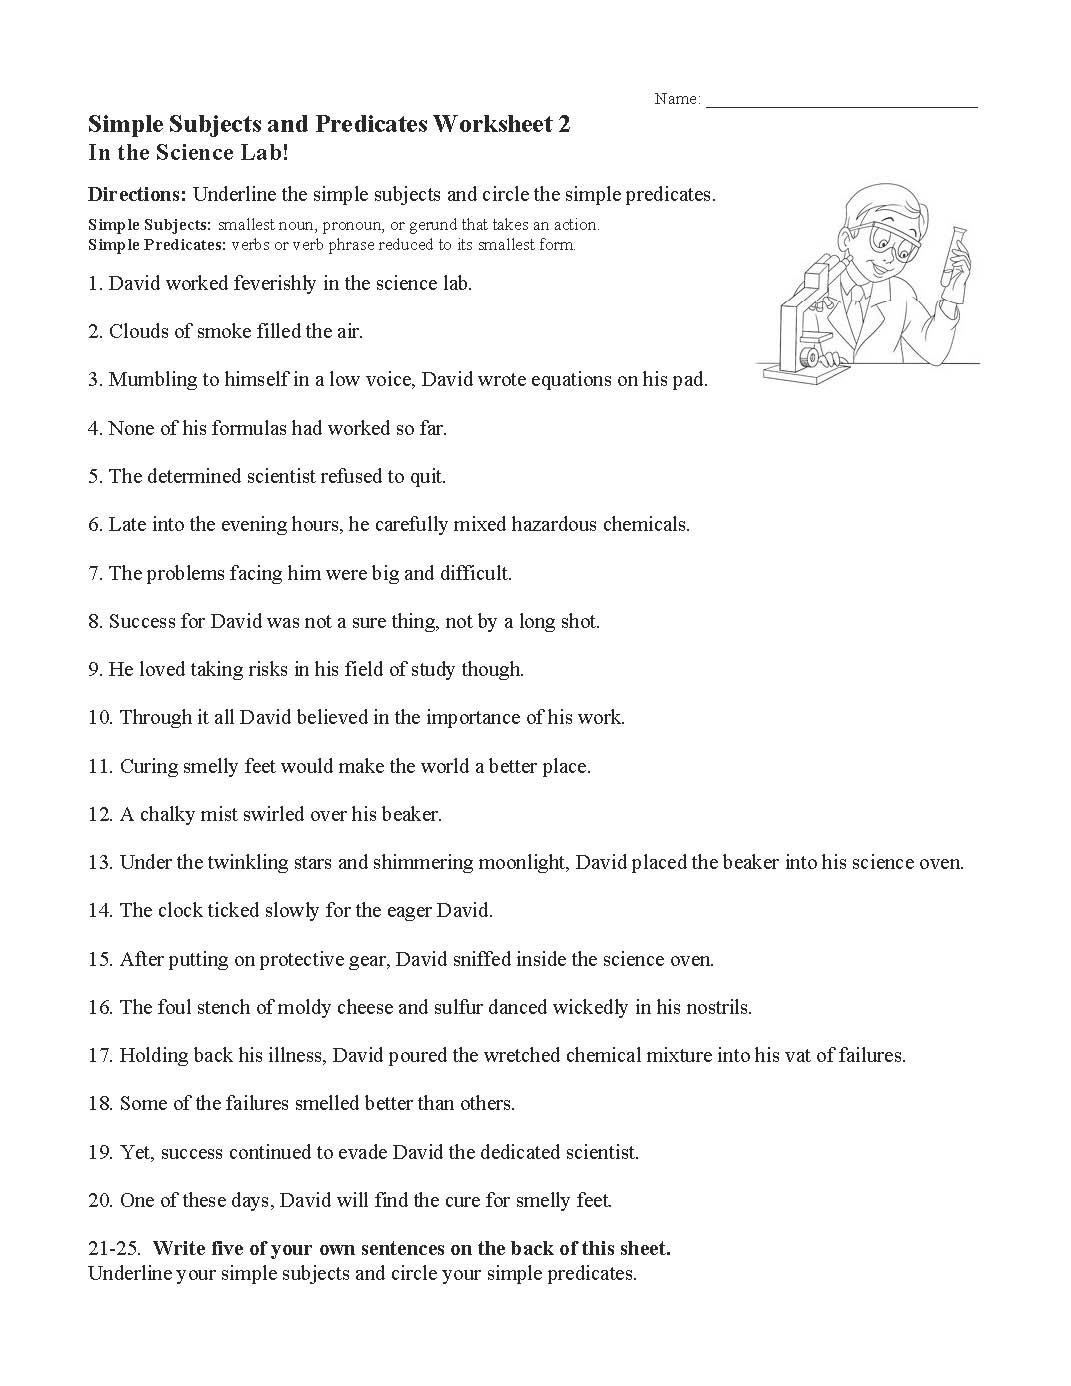 simple-subjects-and-predicates-worksheet-2-sentence-structure-activity